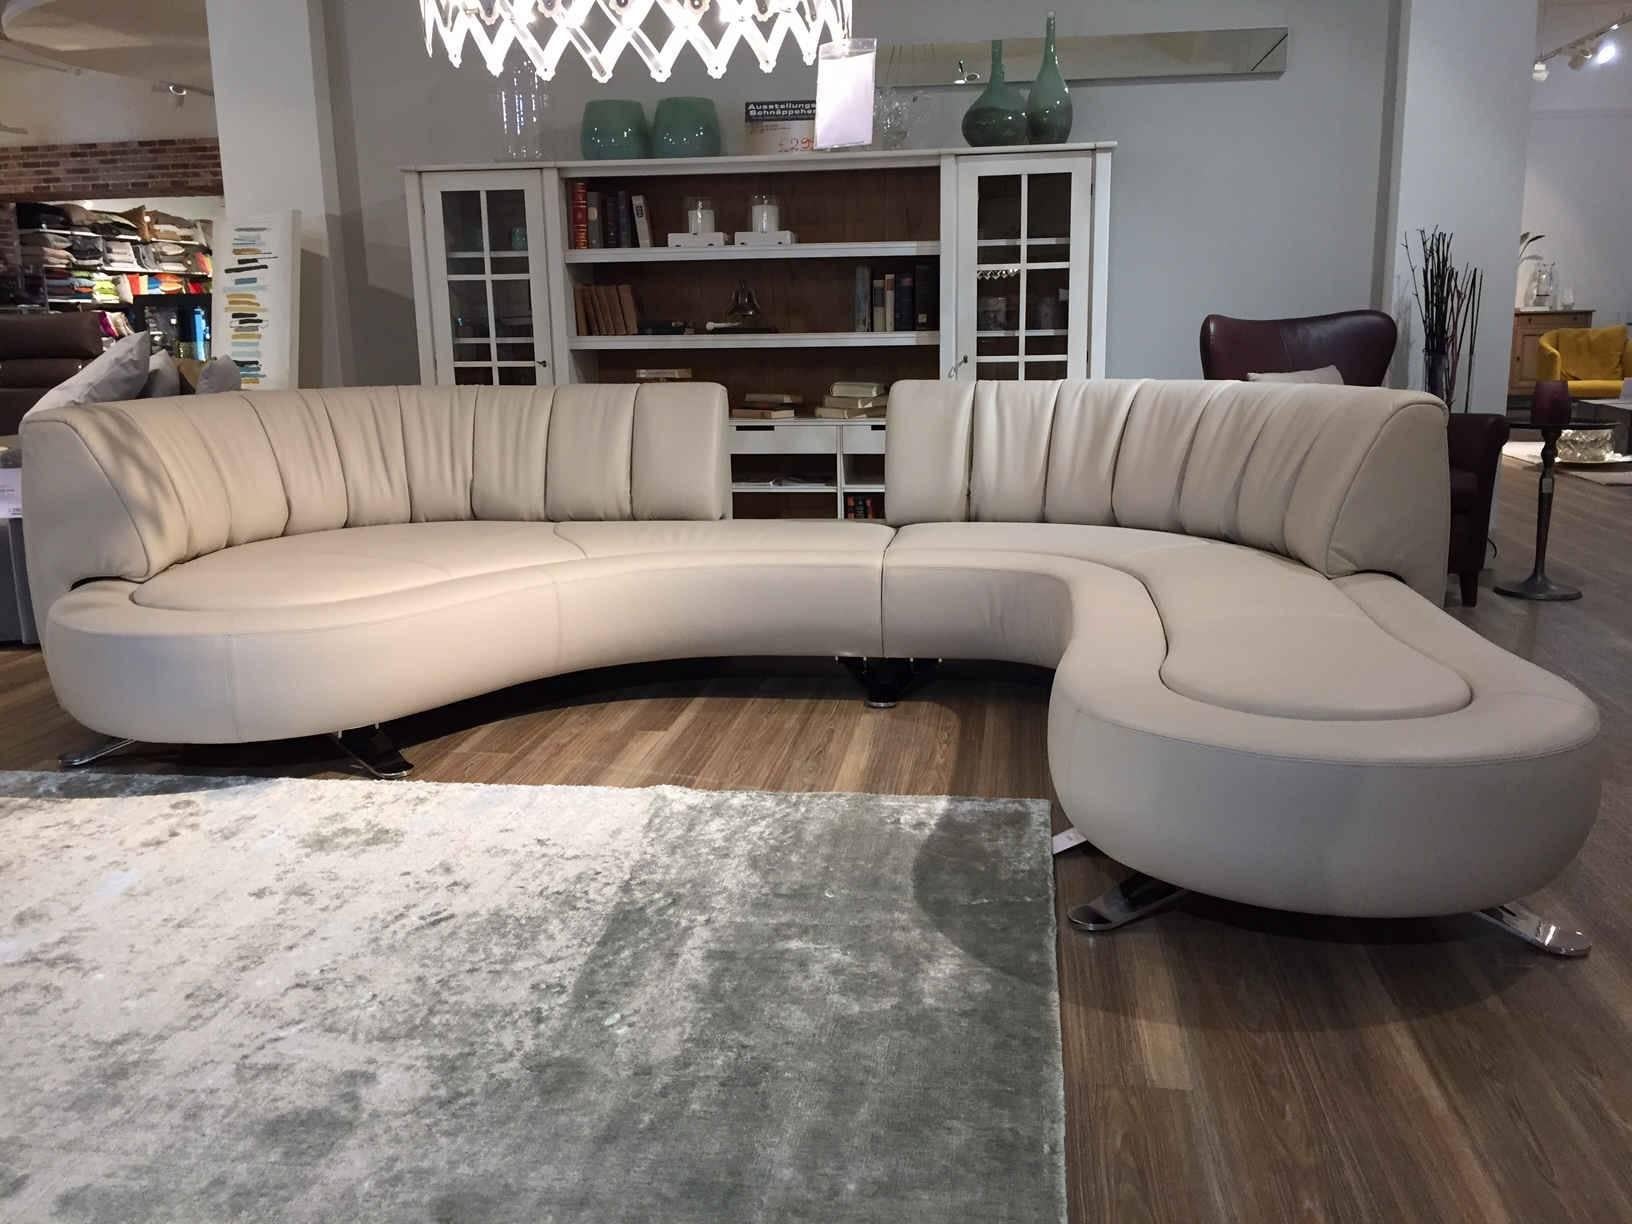 This landscaped interior is an absolute Classic. Seat accommodation for more than six persons this sofa appreciates every apartment with much space. Since it is a well-treated showroom sample this Fine design piece is in excellent condition.